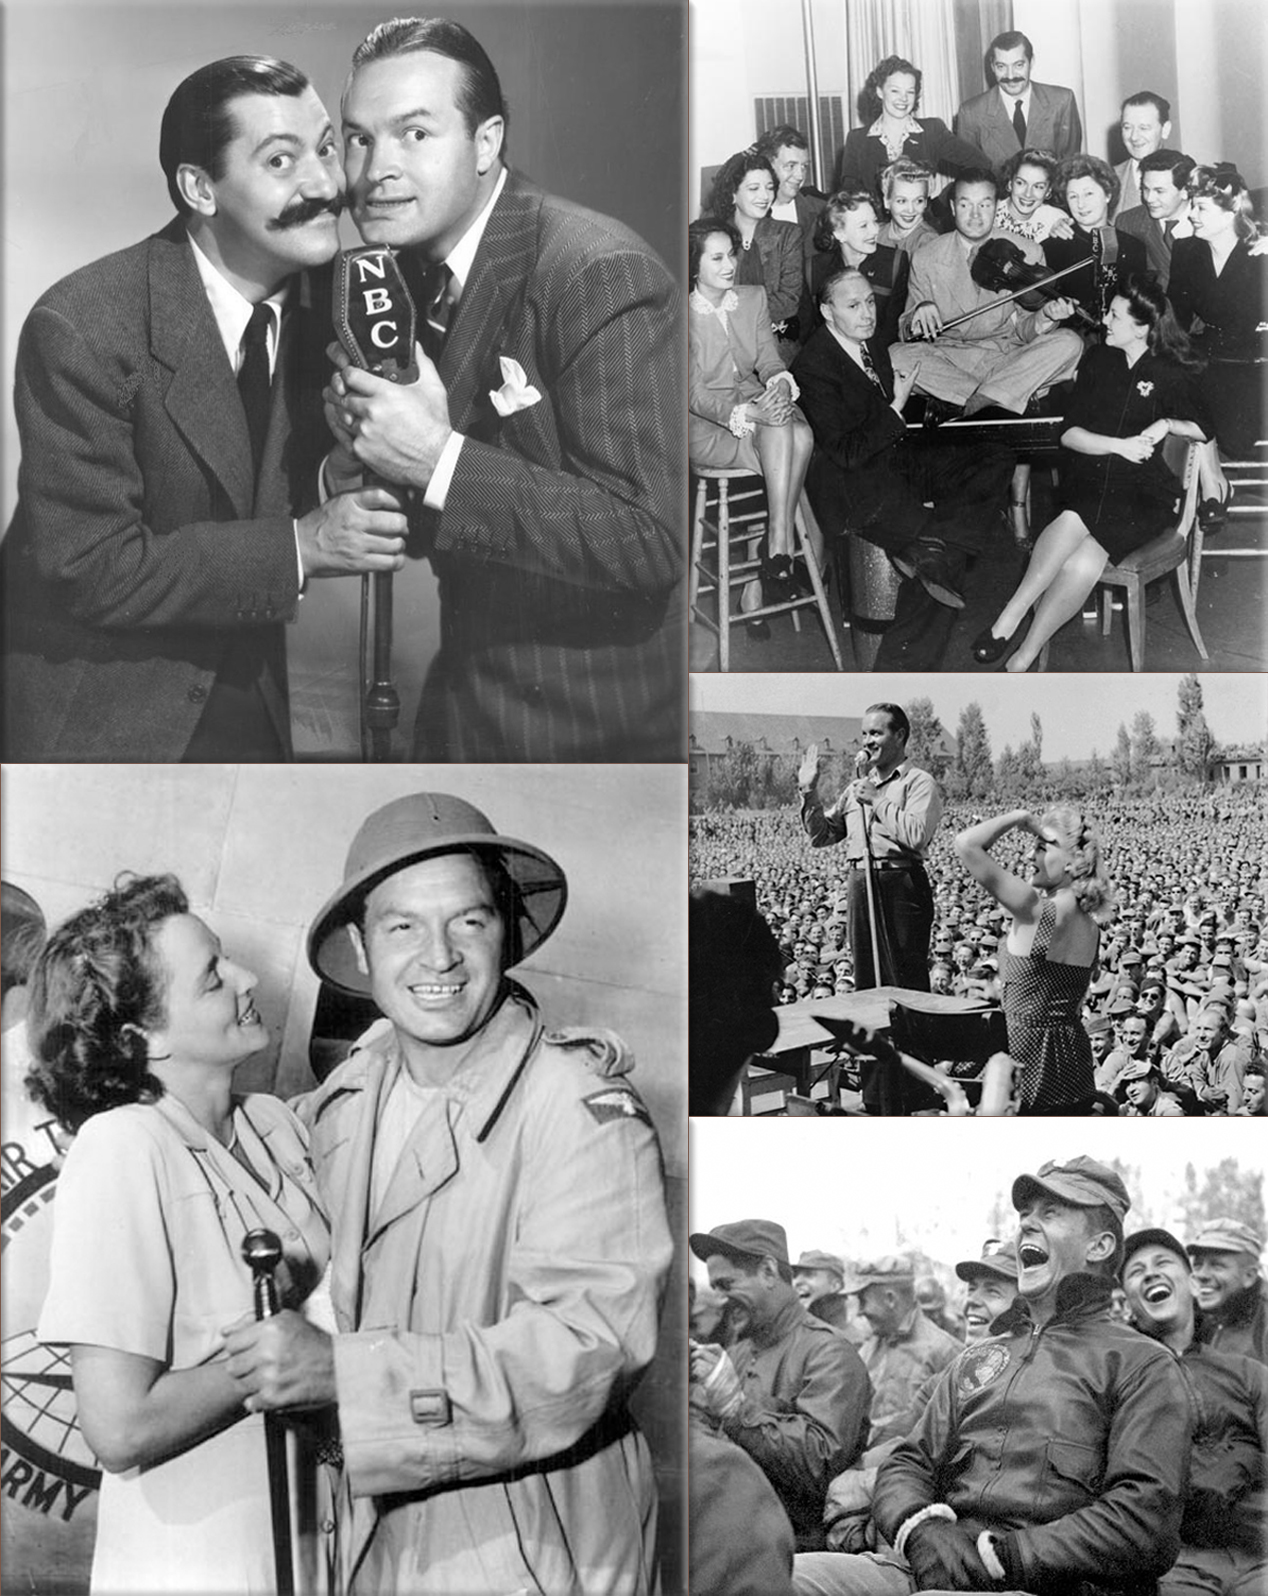 Bob Hope and Jerry Colonna; 1940 NBC, NBC Photo Service ● Bob and Dolores Hope ● Bob Hope Collection, Jack Benny and Bob Hope 1940; Motion Picture, Broadcasting and Recorded Sound Division (89C.2) ● Bob Hope USO Show - Fritzlar, Germany (Hesse) July 26, 1945 - Gale Robbins on stage with Bob Hope ● 1950 Mr Korea, Bob Hope USO Show at Seoul (Audience reaction to the Bob Hope show at Seoul, Korea. October 23, 1950. Capt. Bloomquist. (Army) NARA FILE # 111-SC-351580. (Department of Defense Photo))